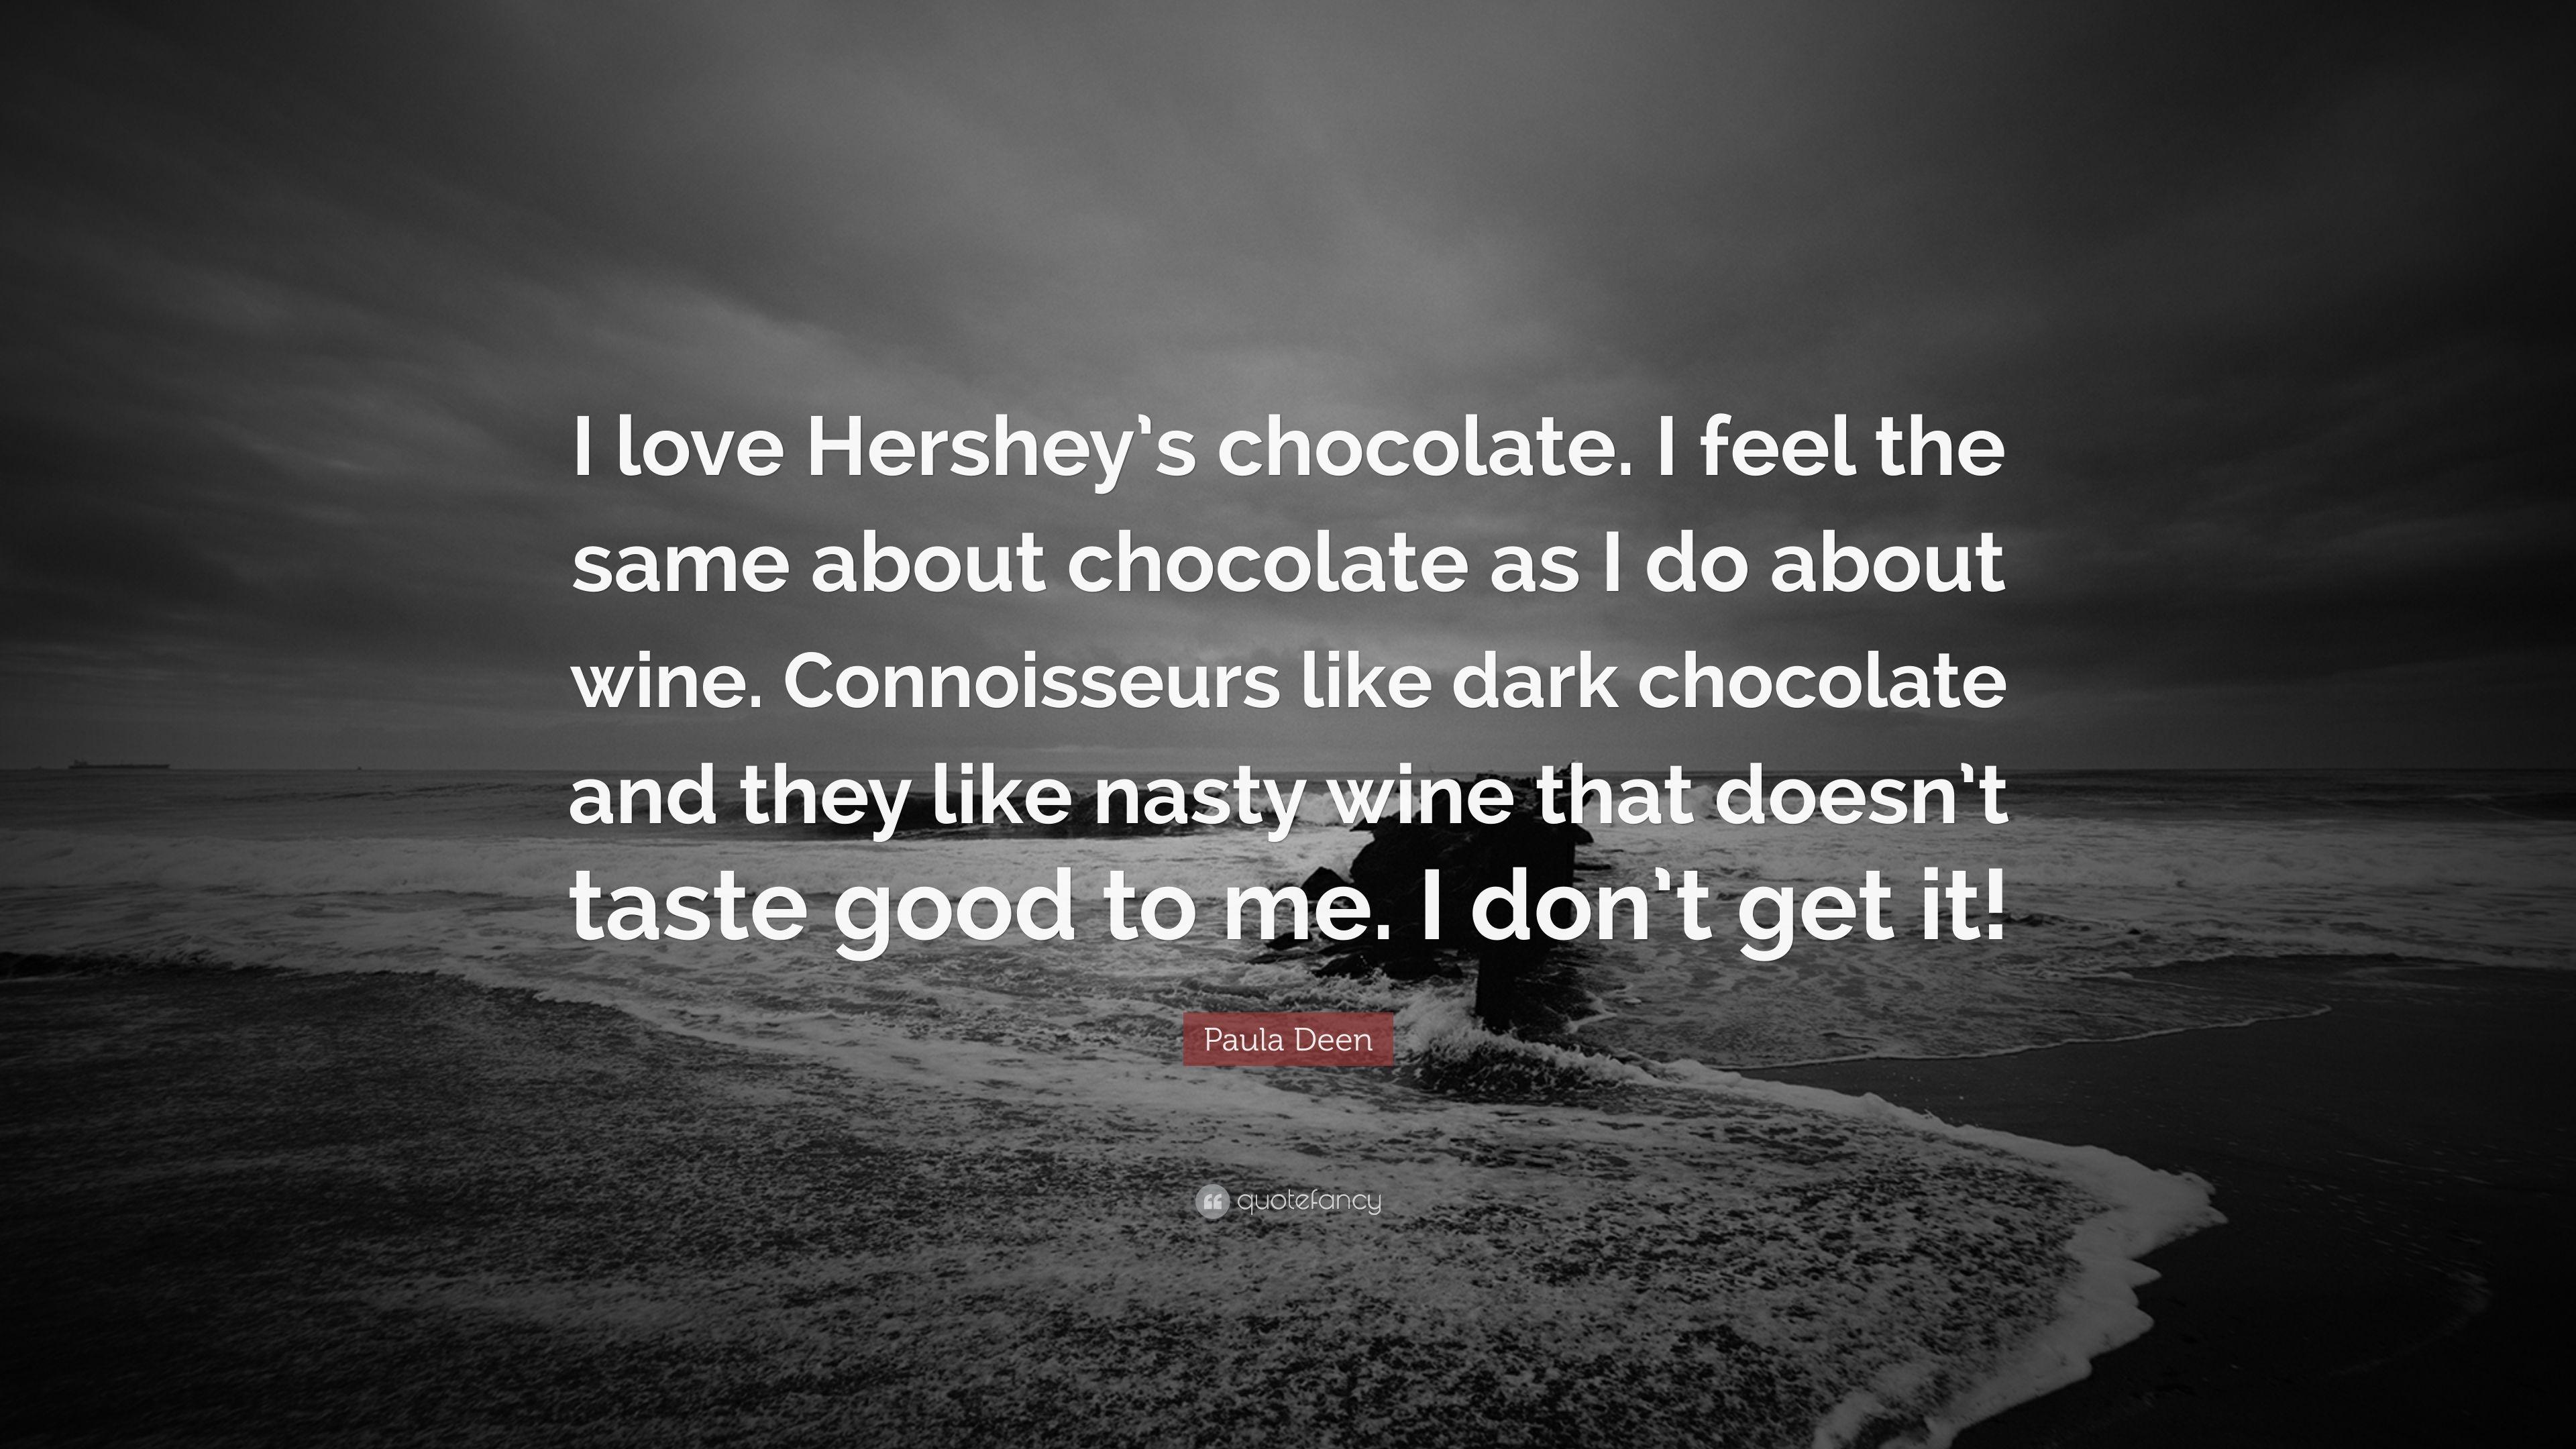 Paula Deen Quote: “I love Hershey's chocolate. I feel the same about